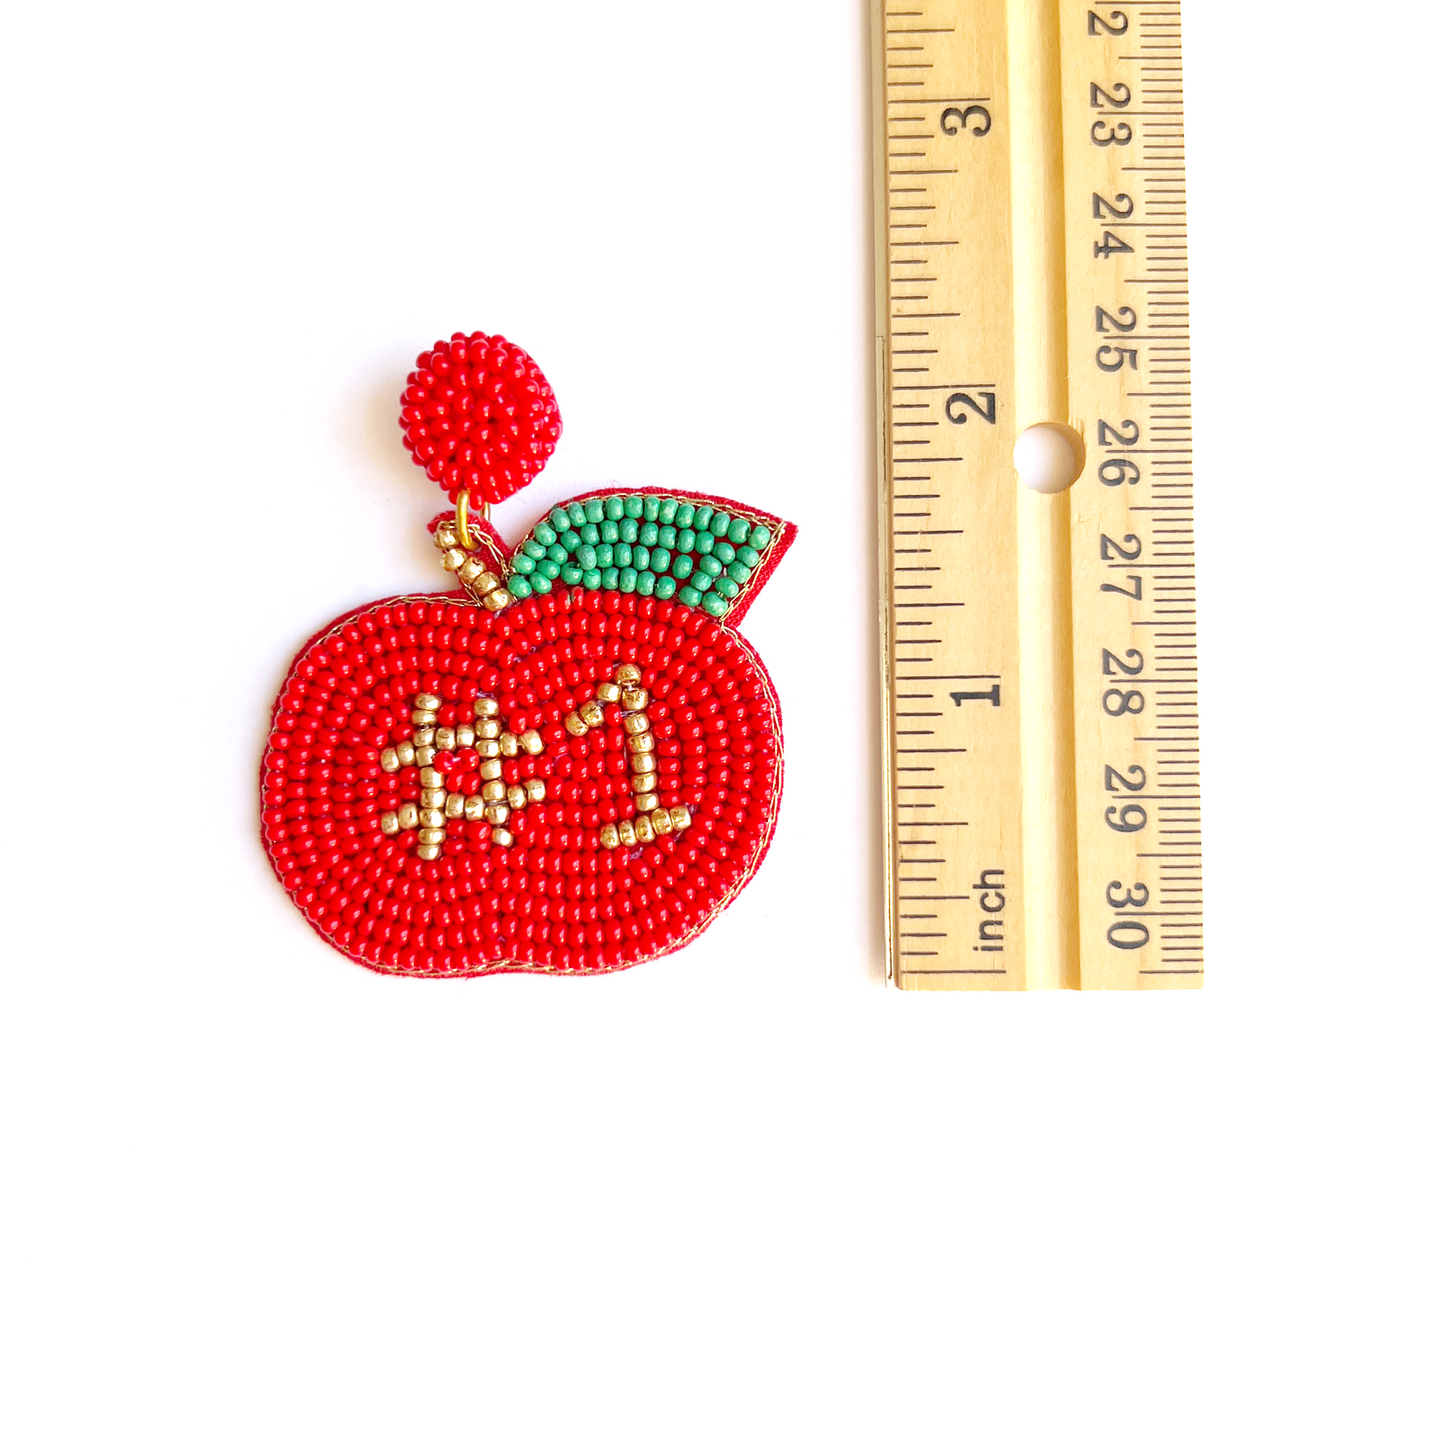 hand beaded apple earring laying next to ruler showing ithe earrings are roughly 2 inches long